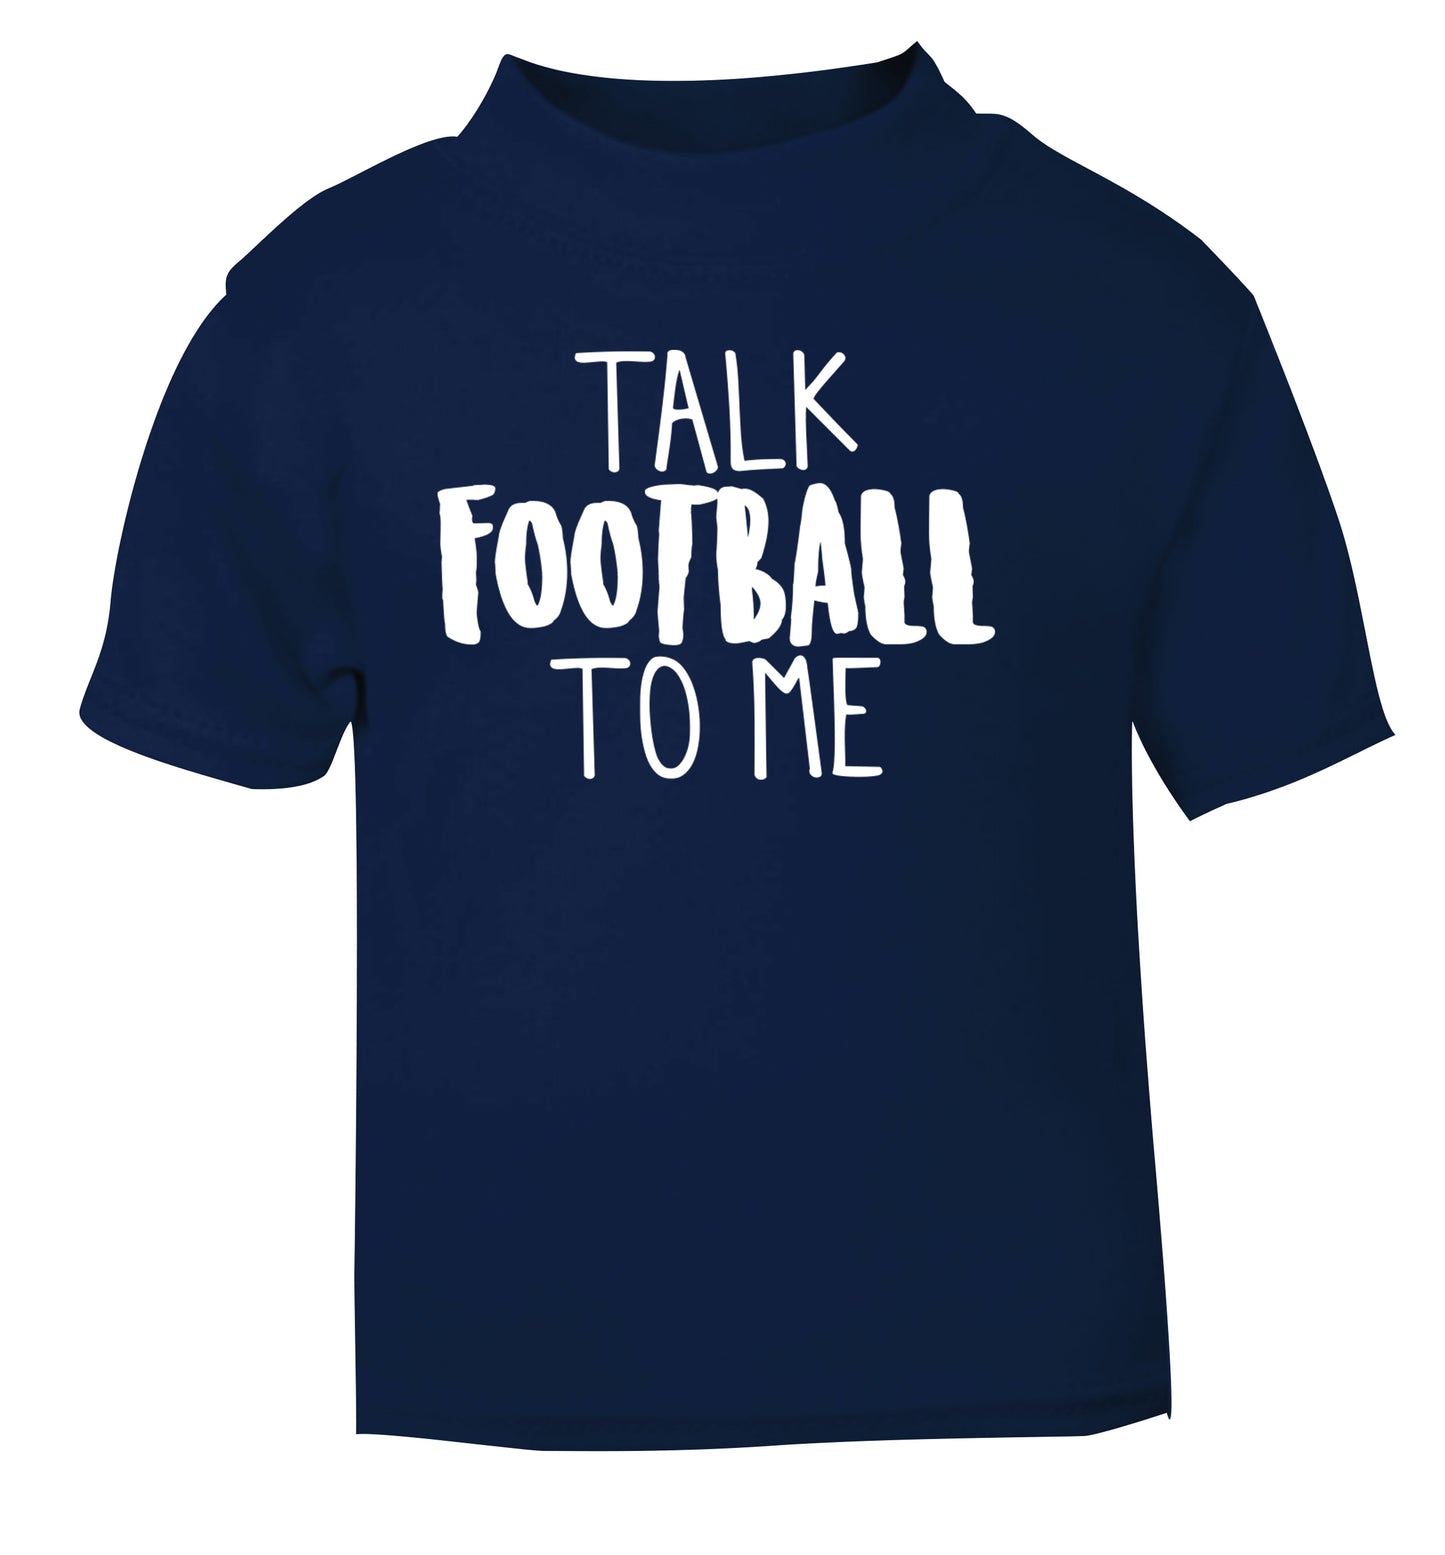 Talk football to me navy Baby Toddler Tshirt 2 Years